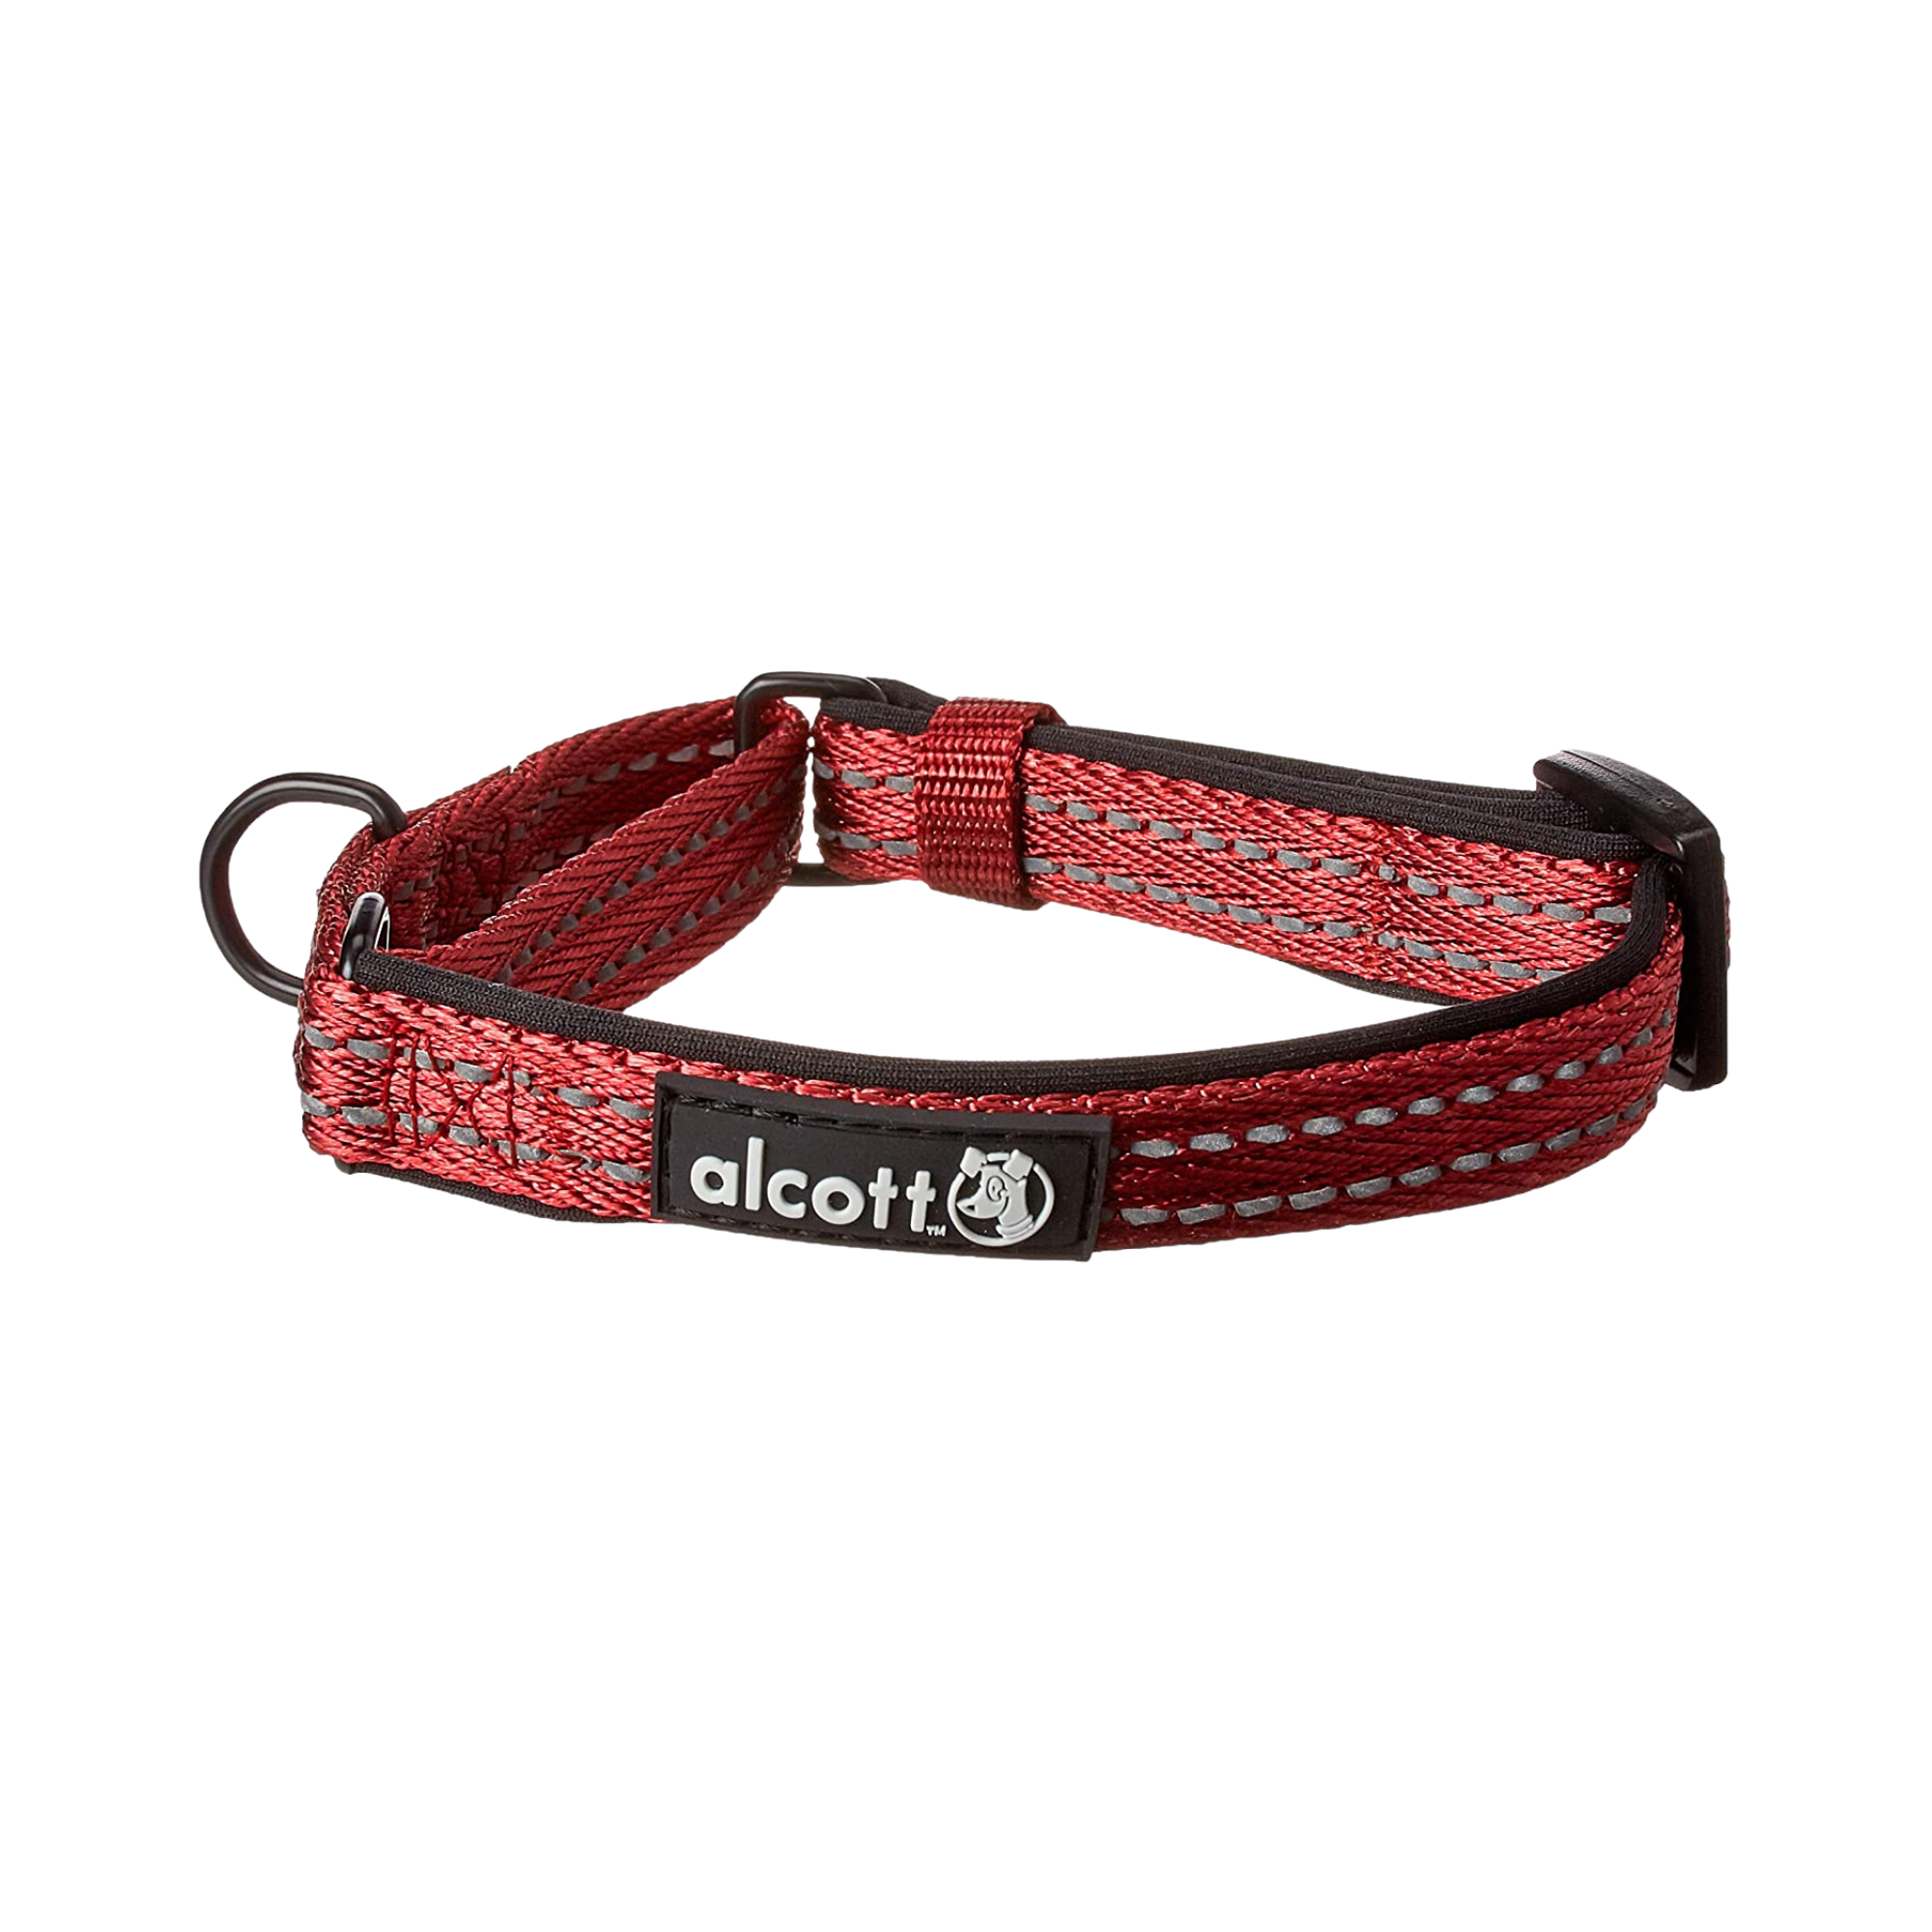 Alcott Martingale Collar Red - Mutts & Co.